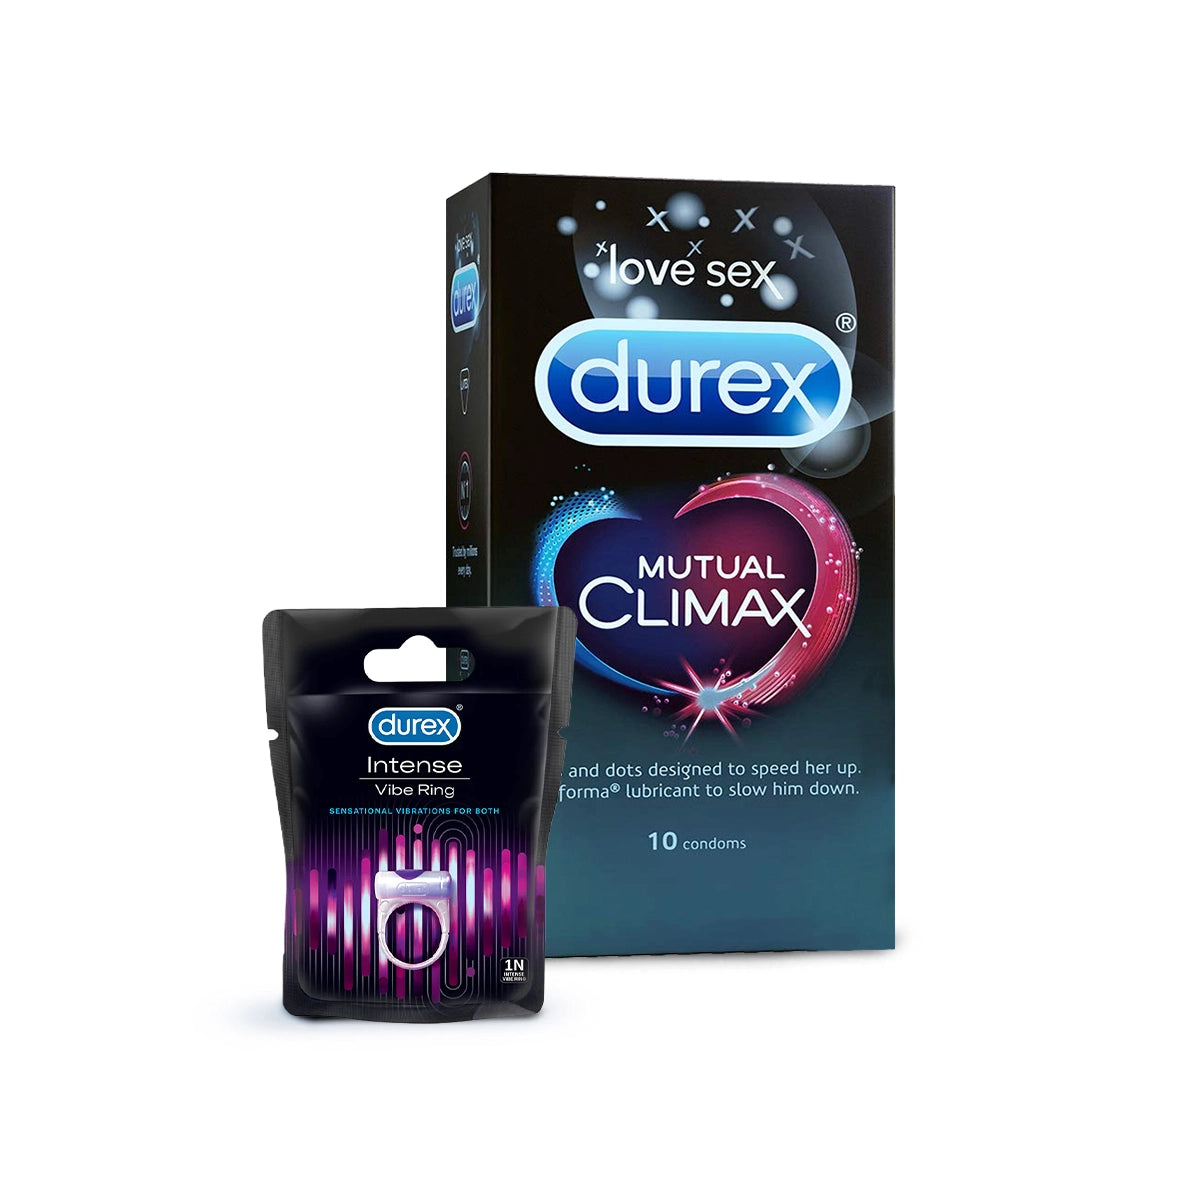 Buy Durex Air Ultra Thin Condoms - 10s & Durex Play Vibrations Ring Online  at Low Prices in India - Amazon.in